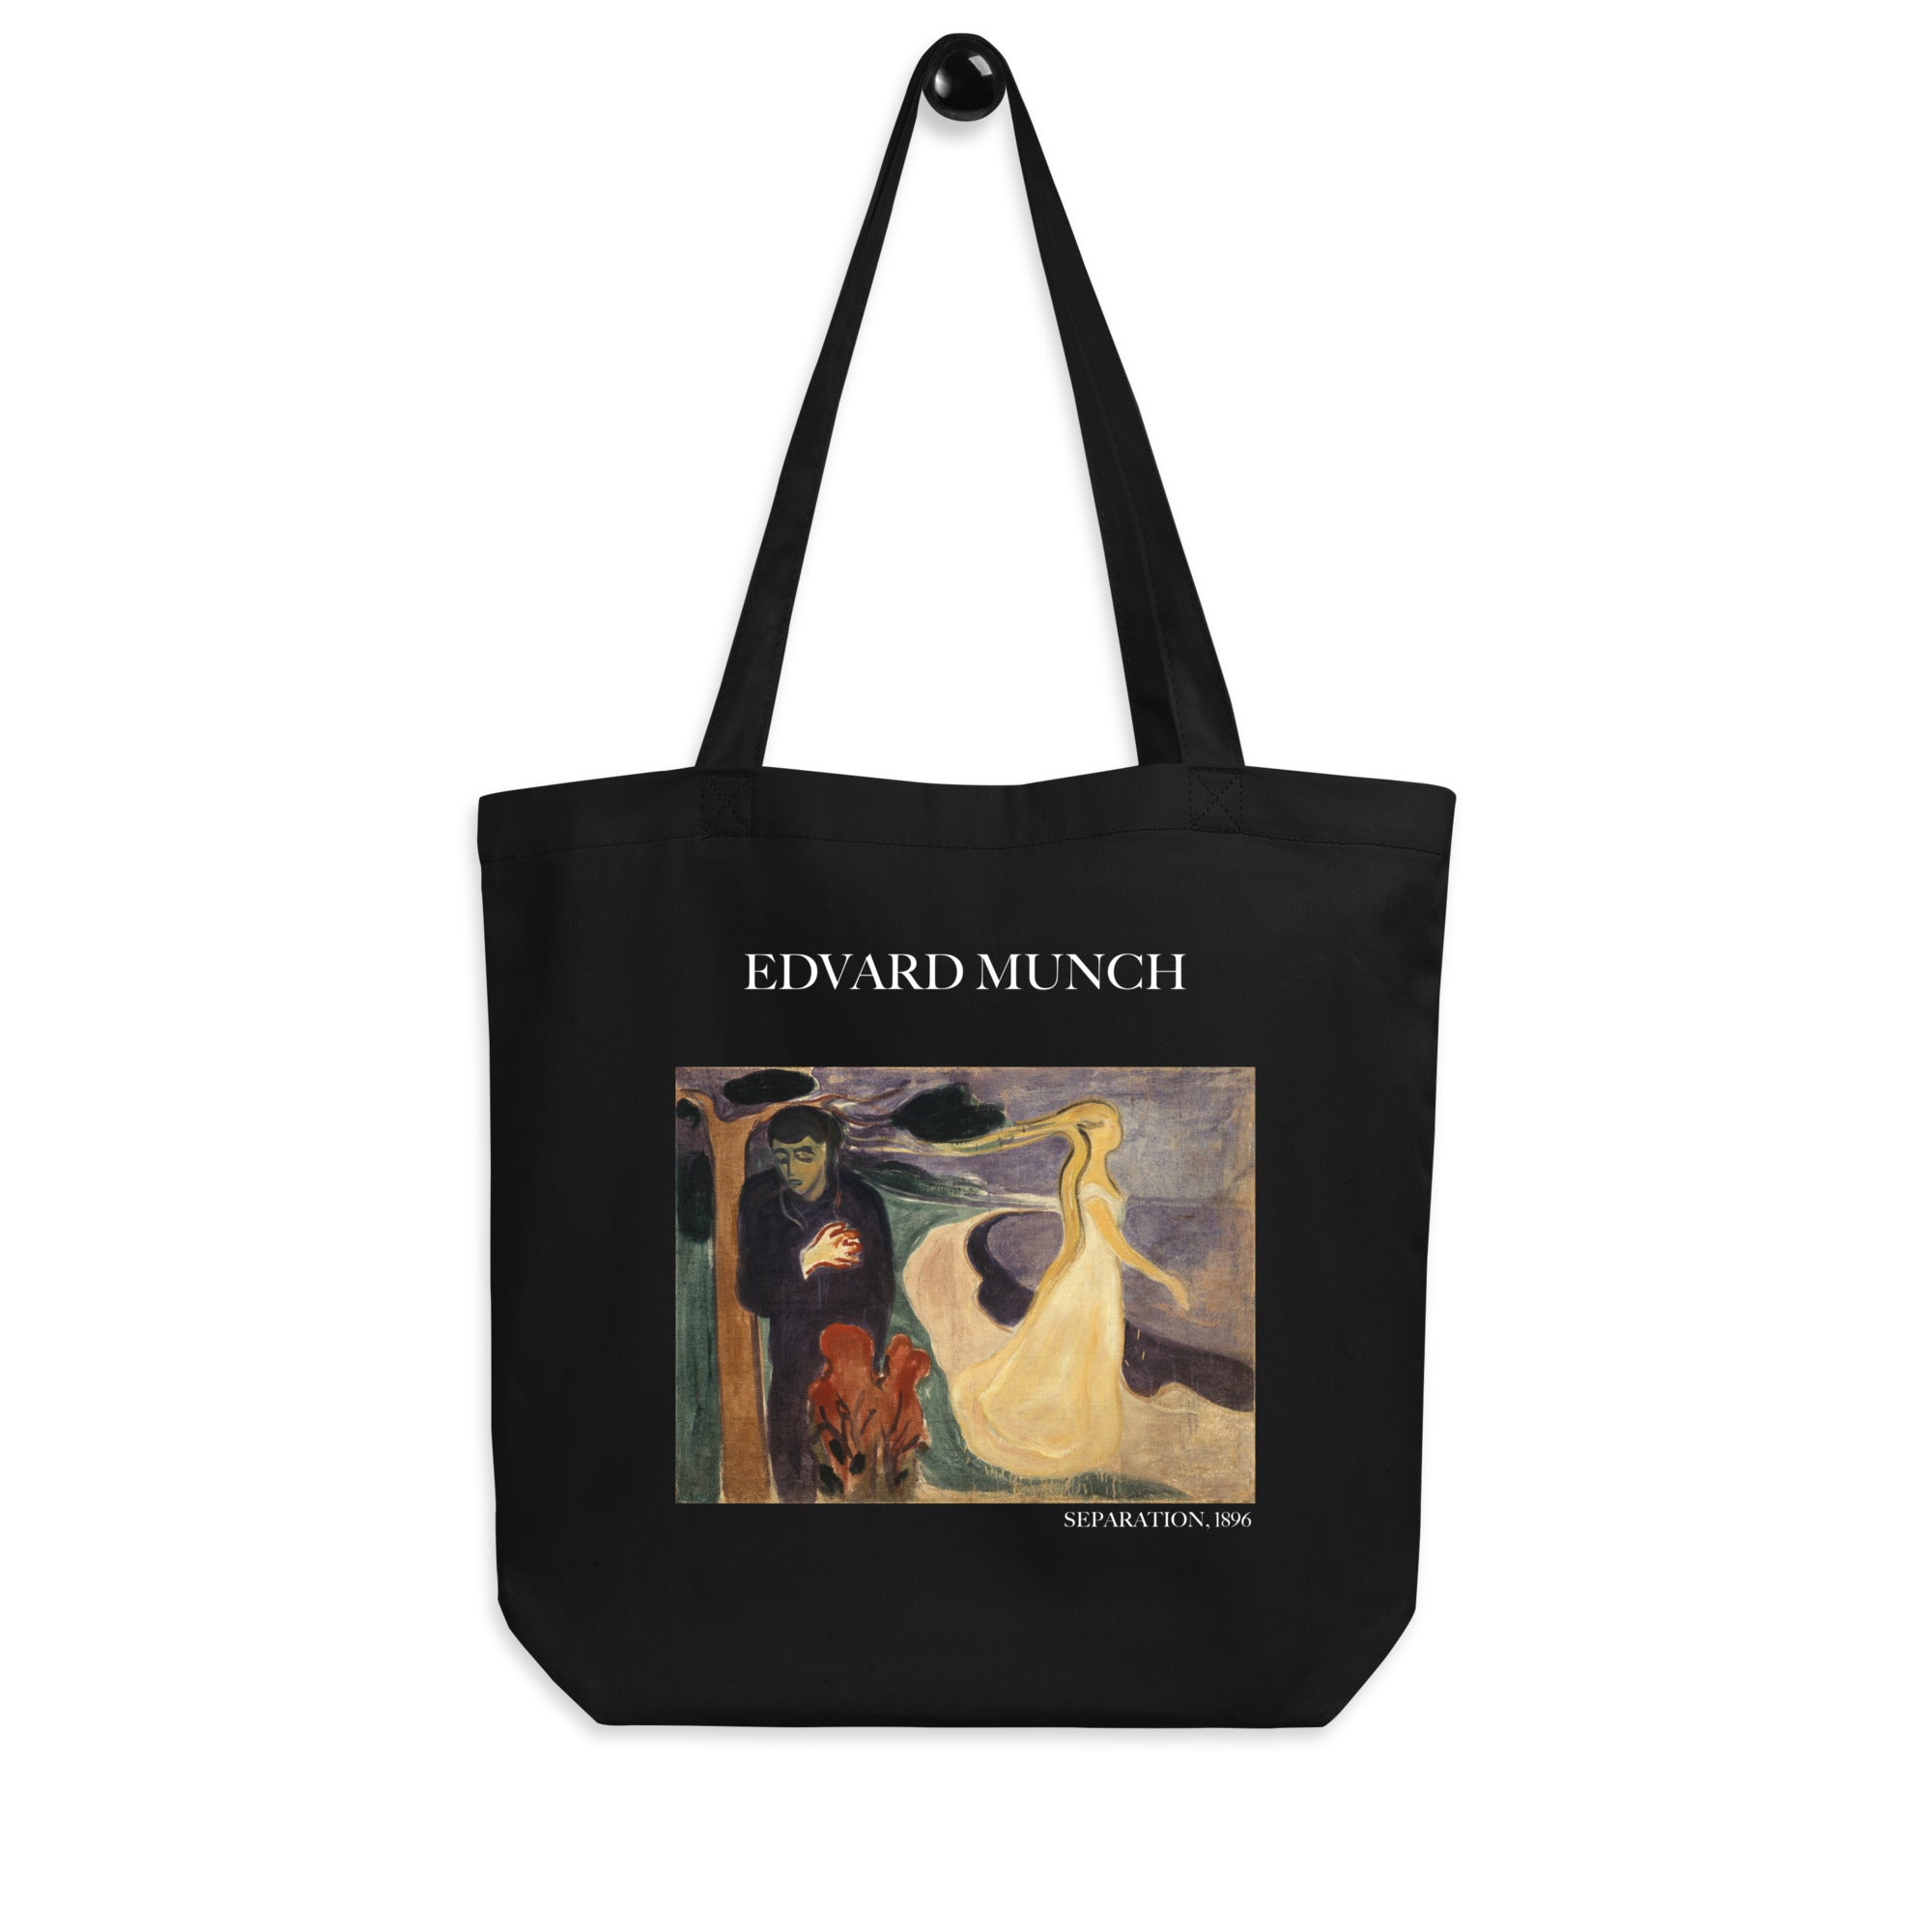 Edvard Munch 'Separation' Famous Painting Totebag | Eco Friendly Art Tote Bag